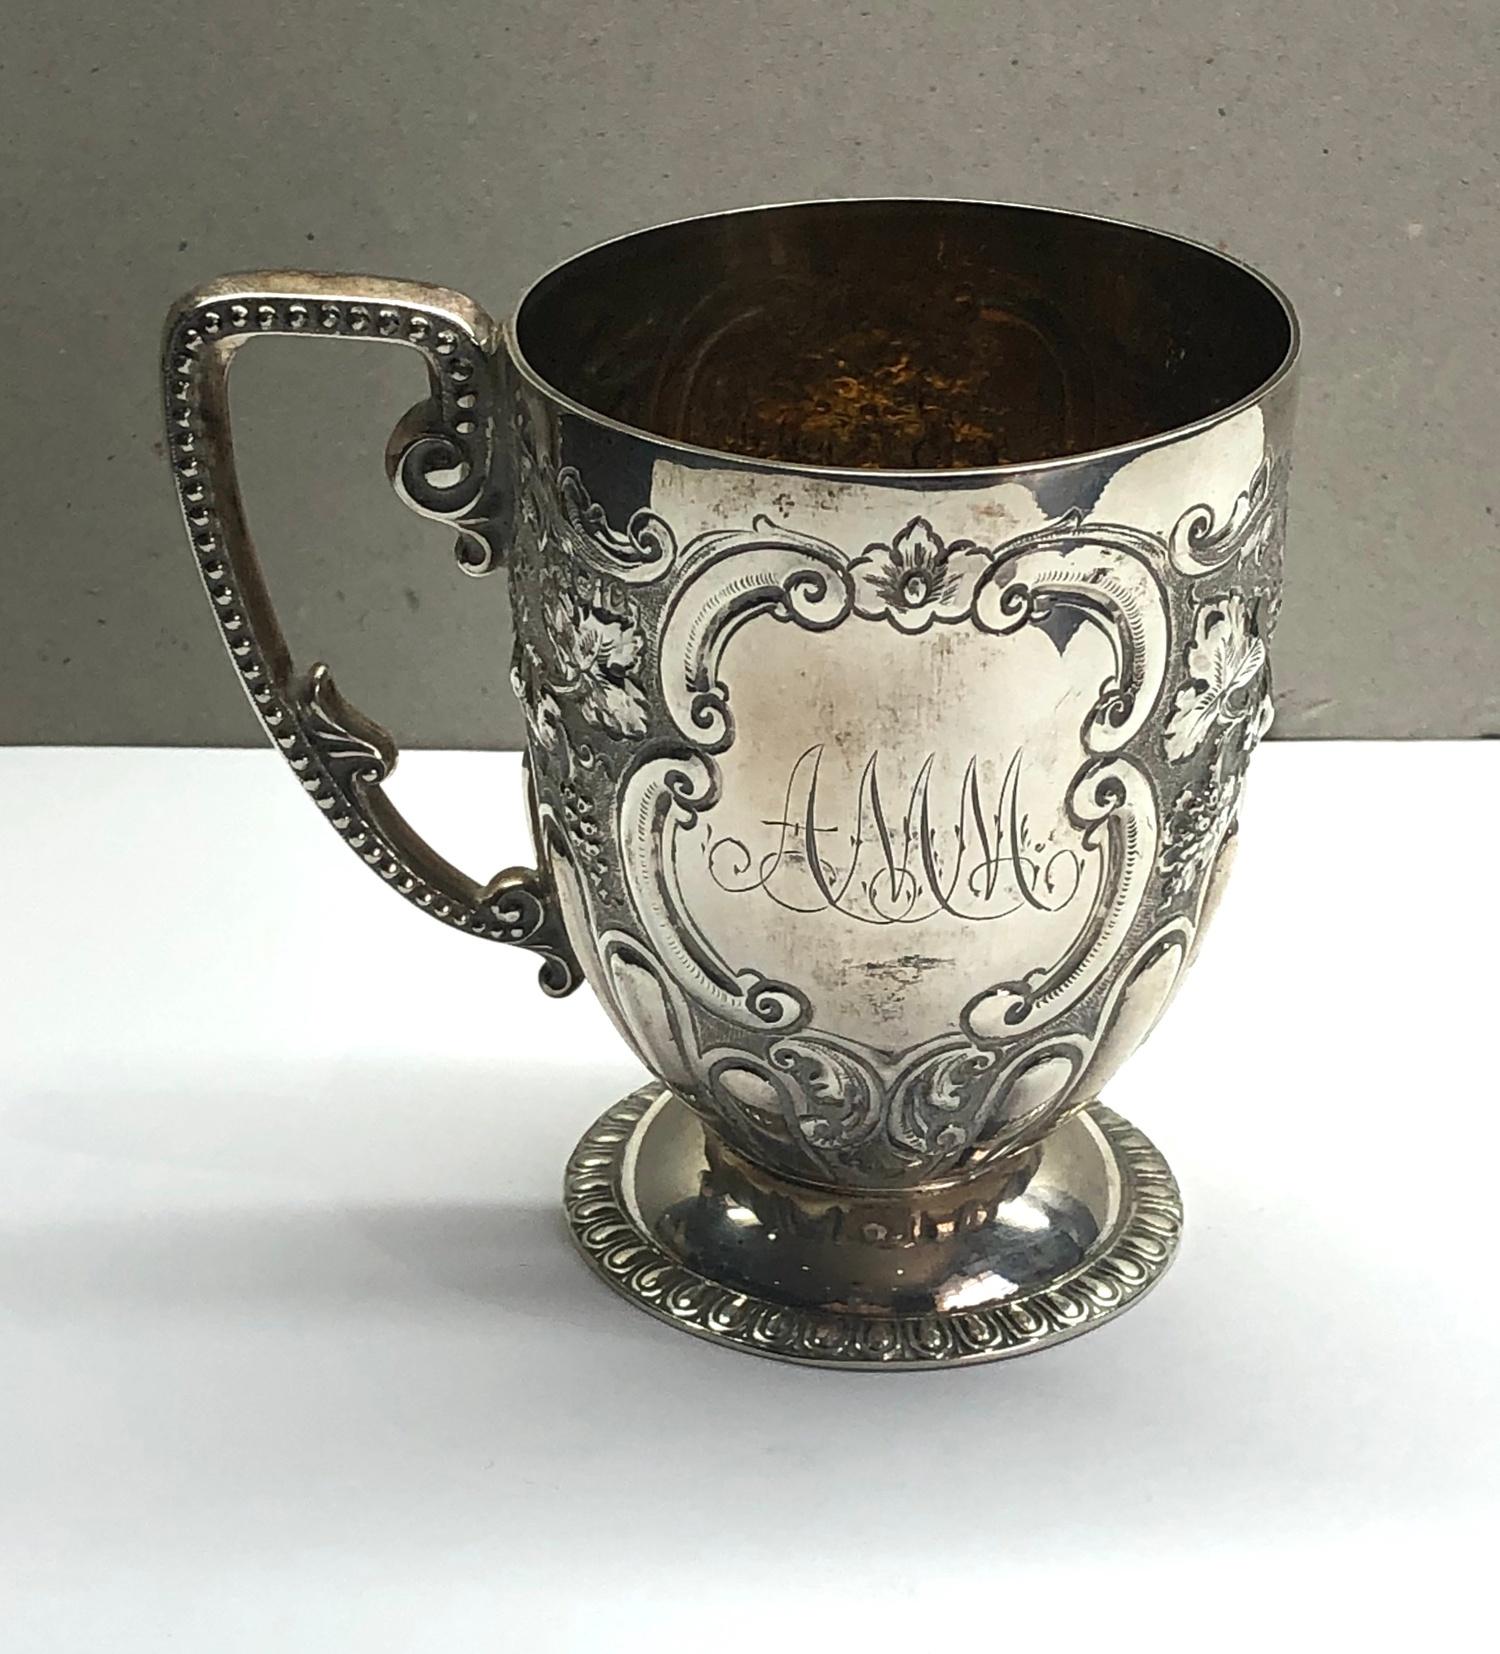 Antique ornate silver mug London silver hallmarks engraved initials measures approx. height 9cm - Image 4 of 5